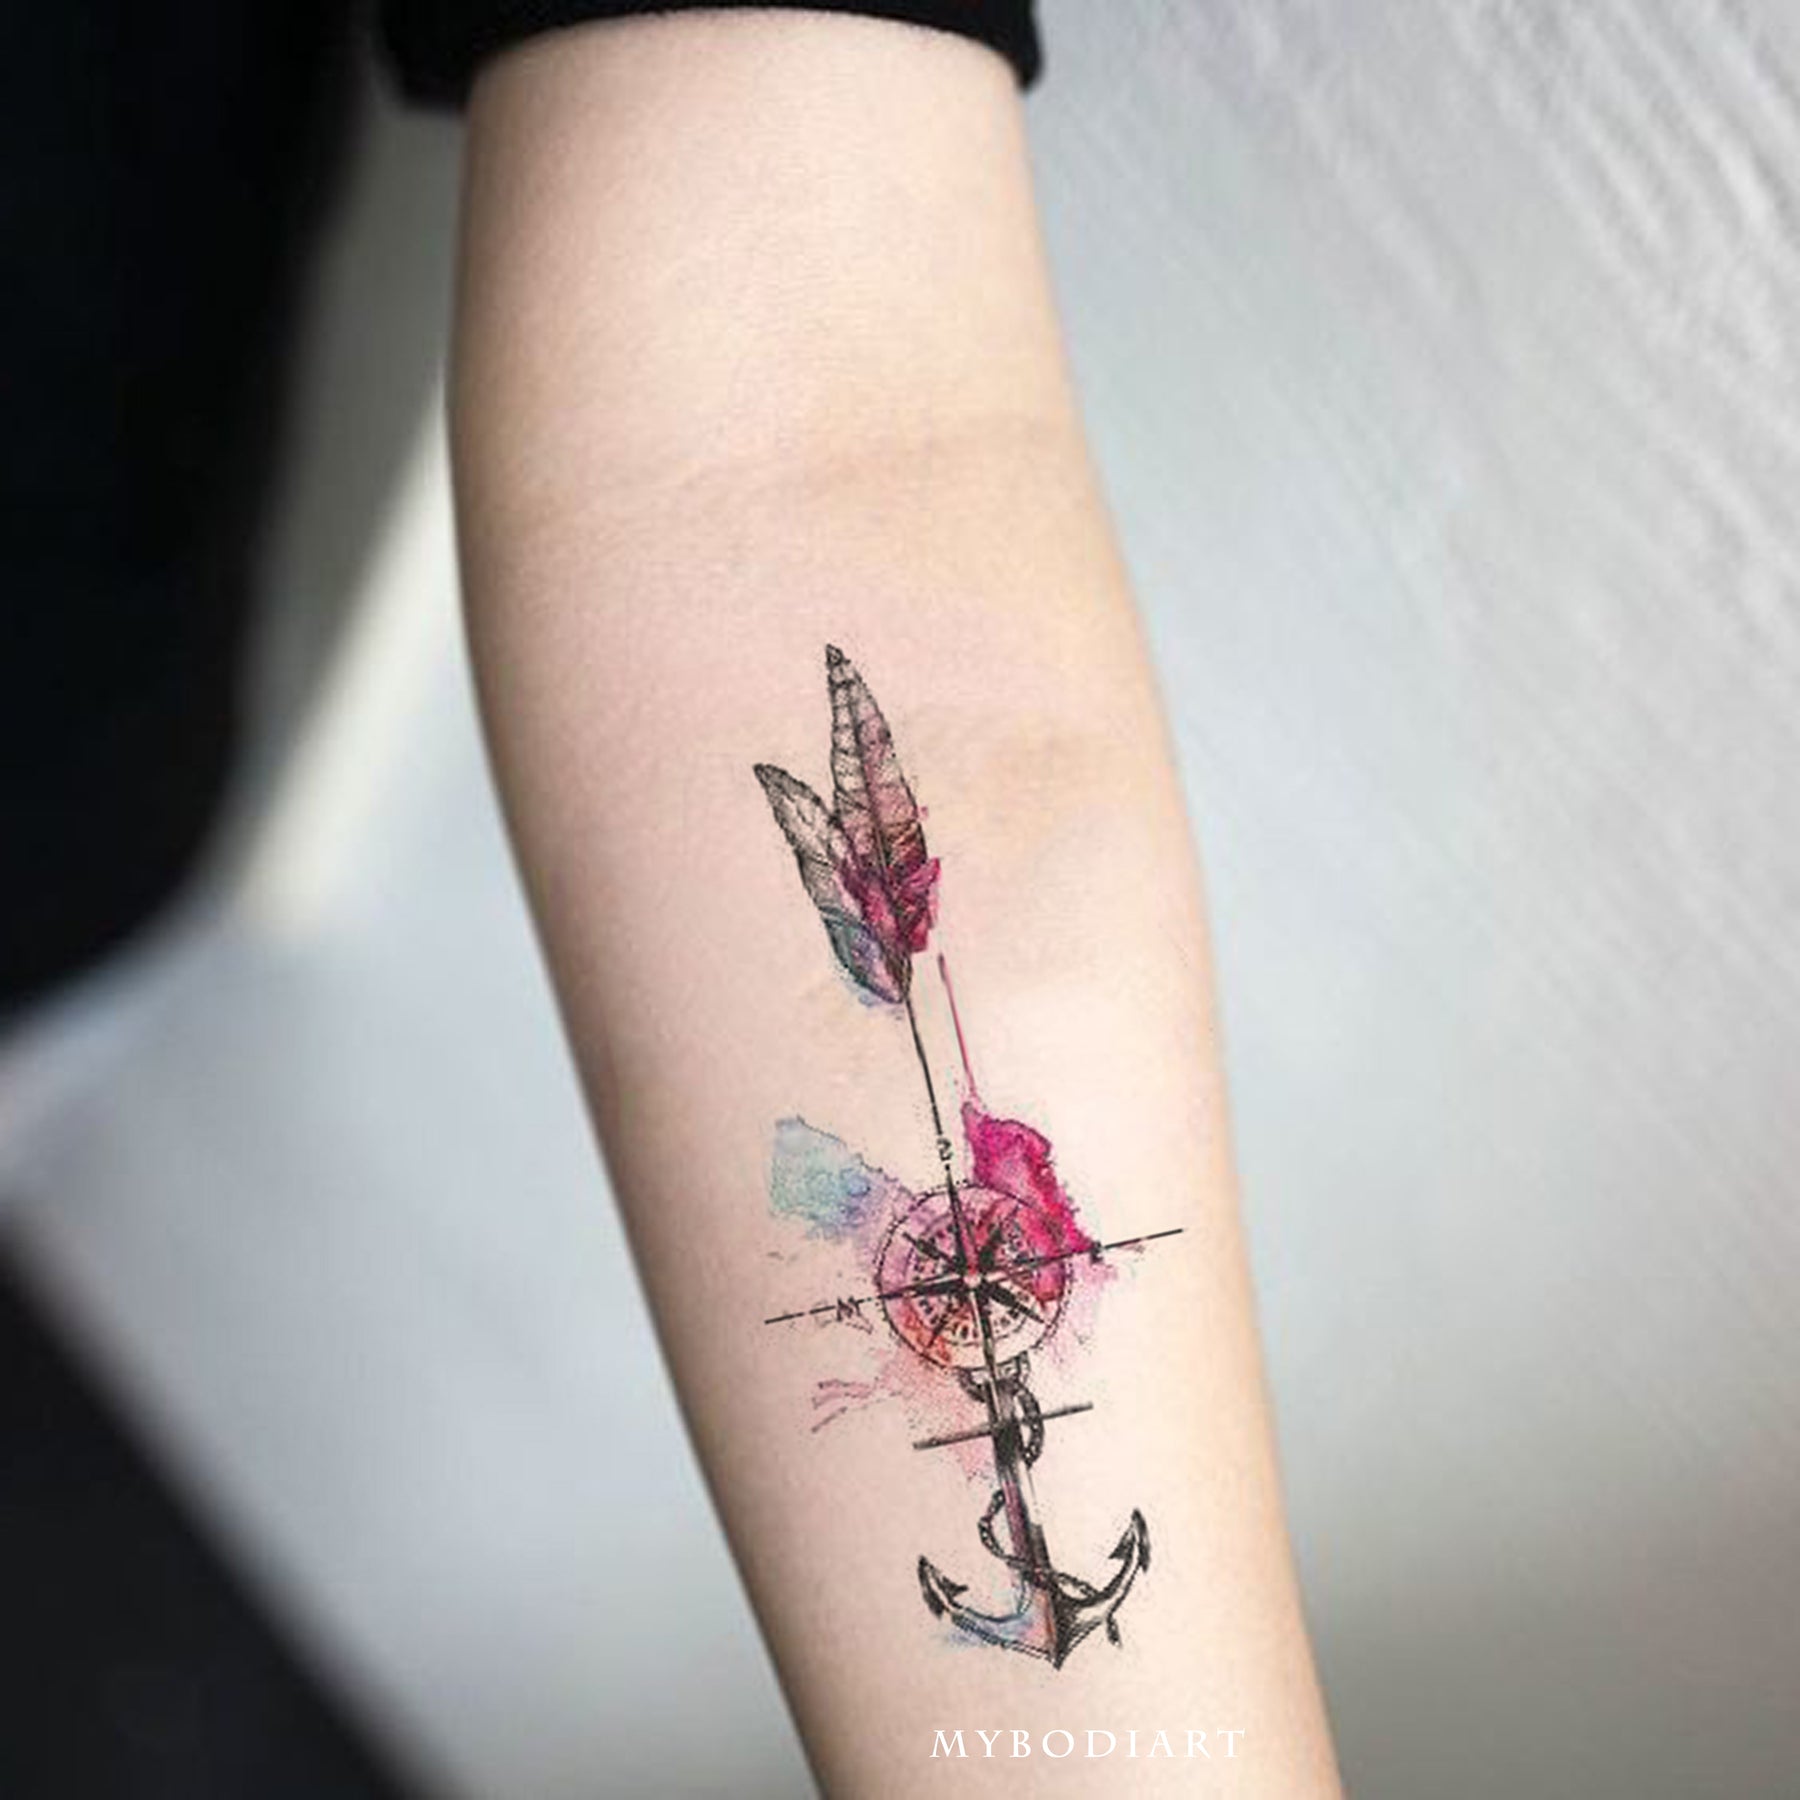 Tattoo uploaded by JenTheRipper • Feather and anchor tattoos by Matty Nox  #MattyNox #watercolor #feather #anchor • Tattoodo